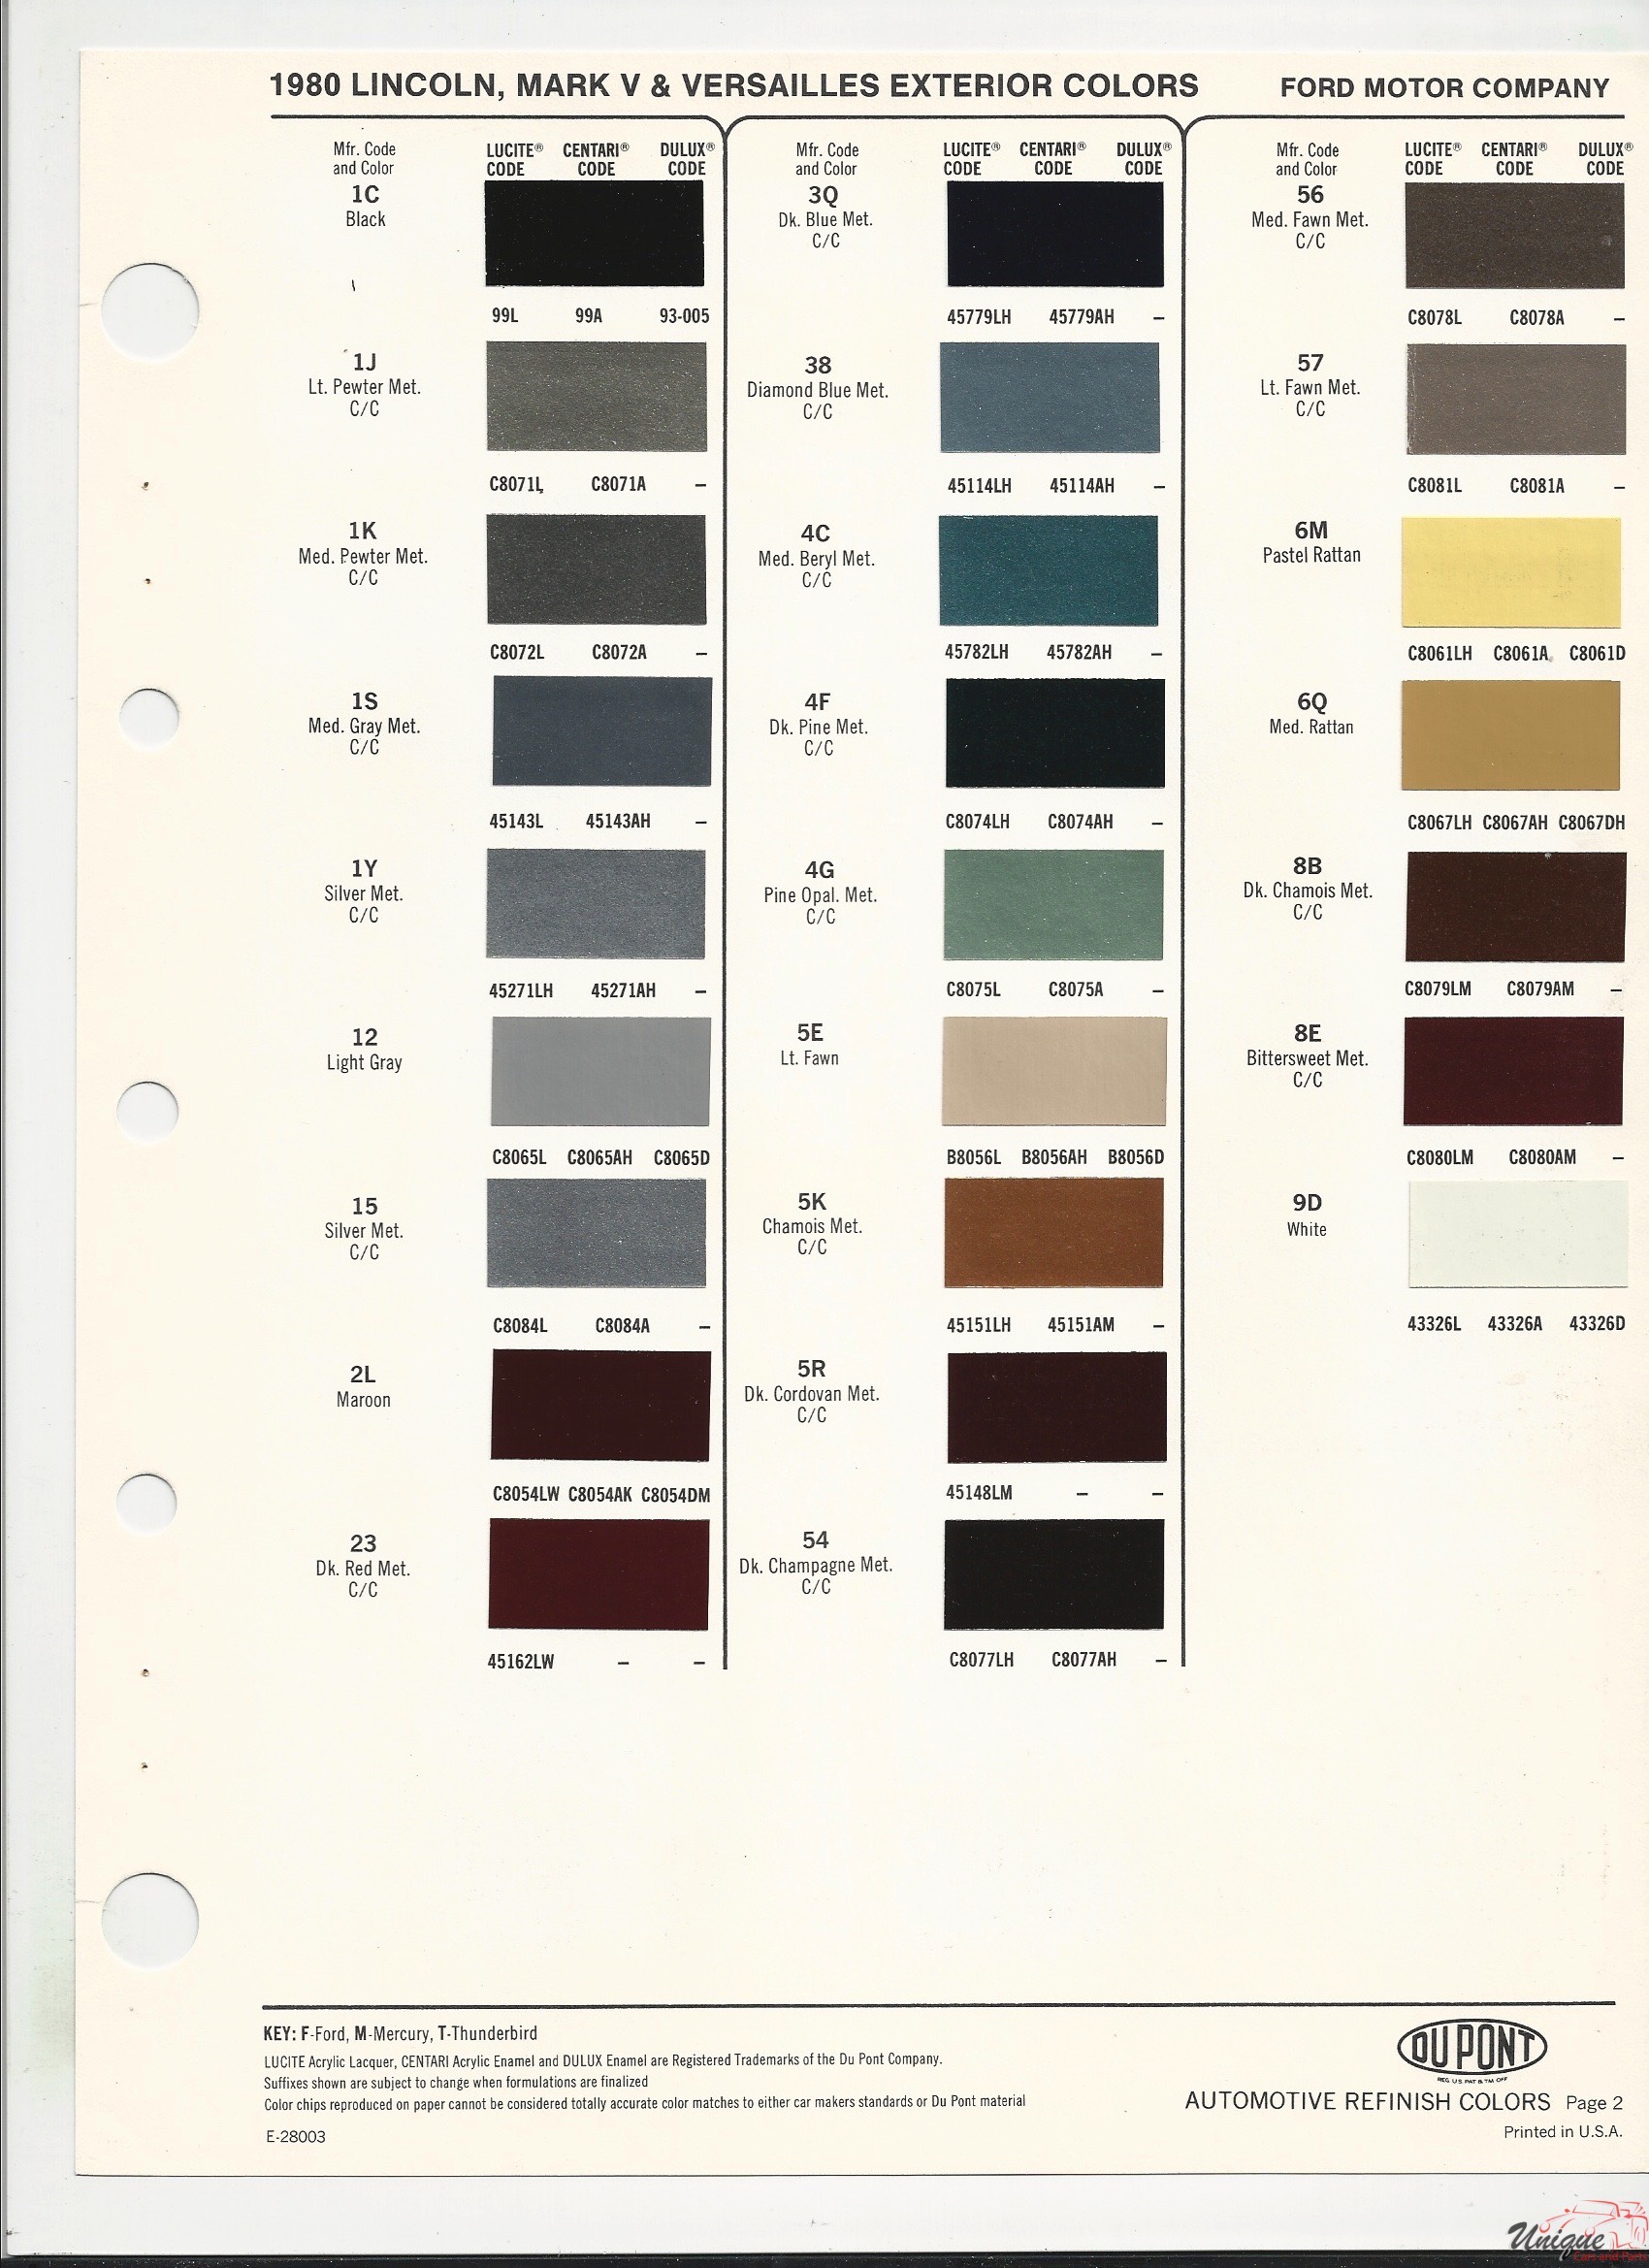 1980 Ford-2 Paint Charts